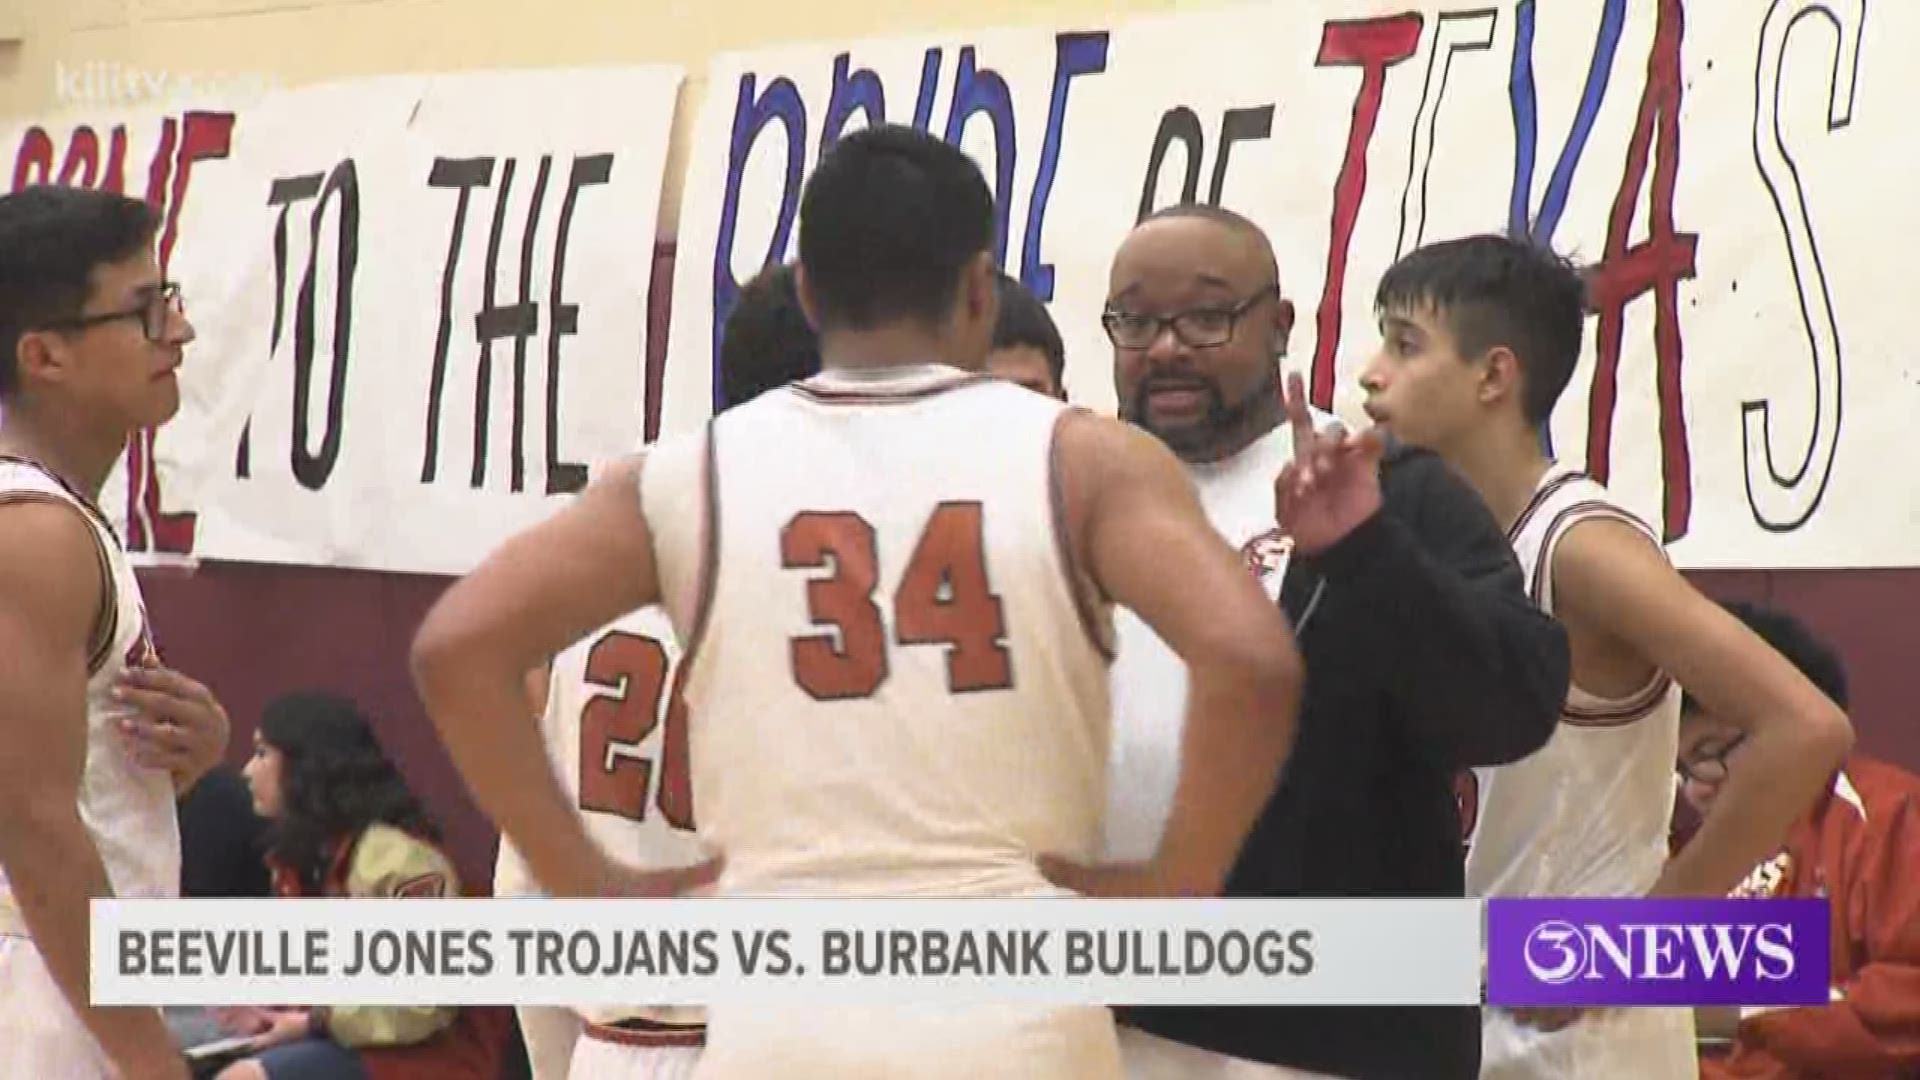 Burbank went on a big run to start the second half in a 48-31 win over the Trojans.